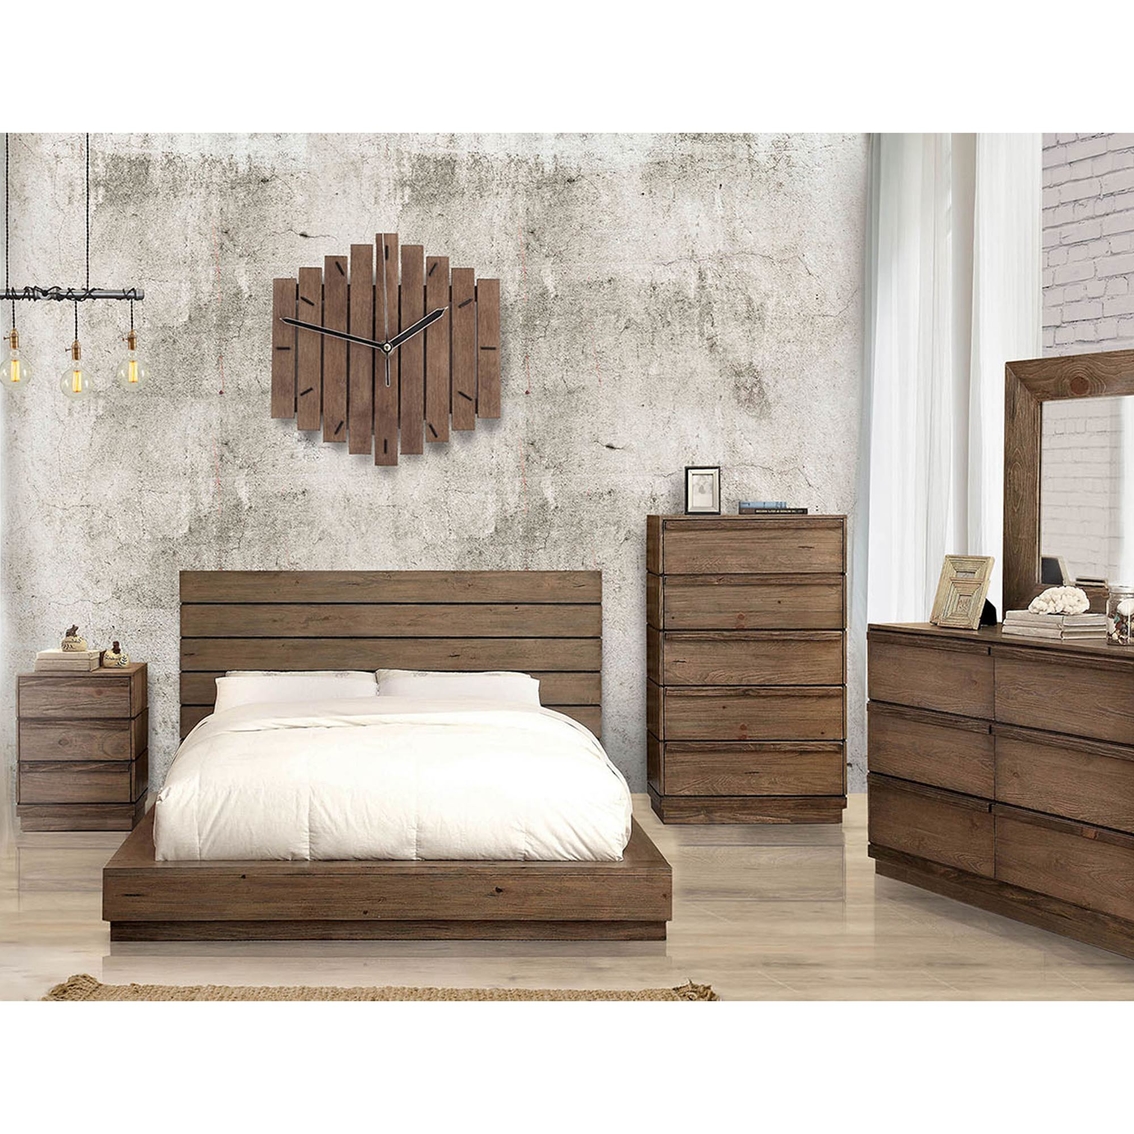 Furniture of America Coimbra Queen Bed - Image 3 of 3